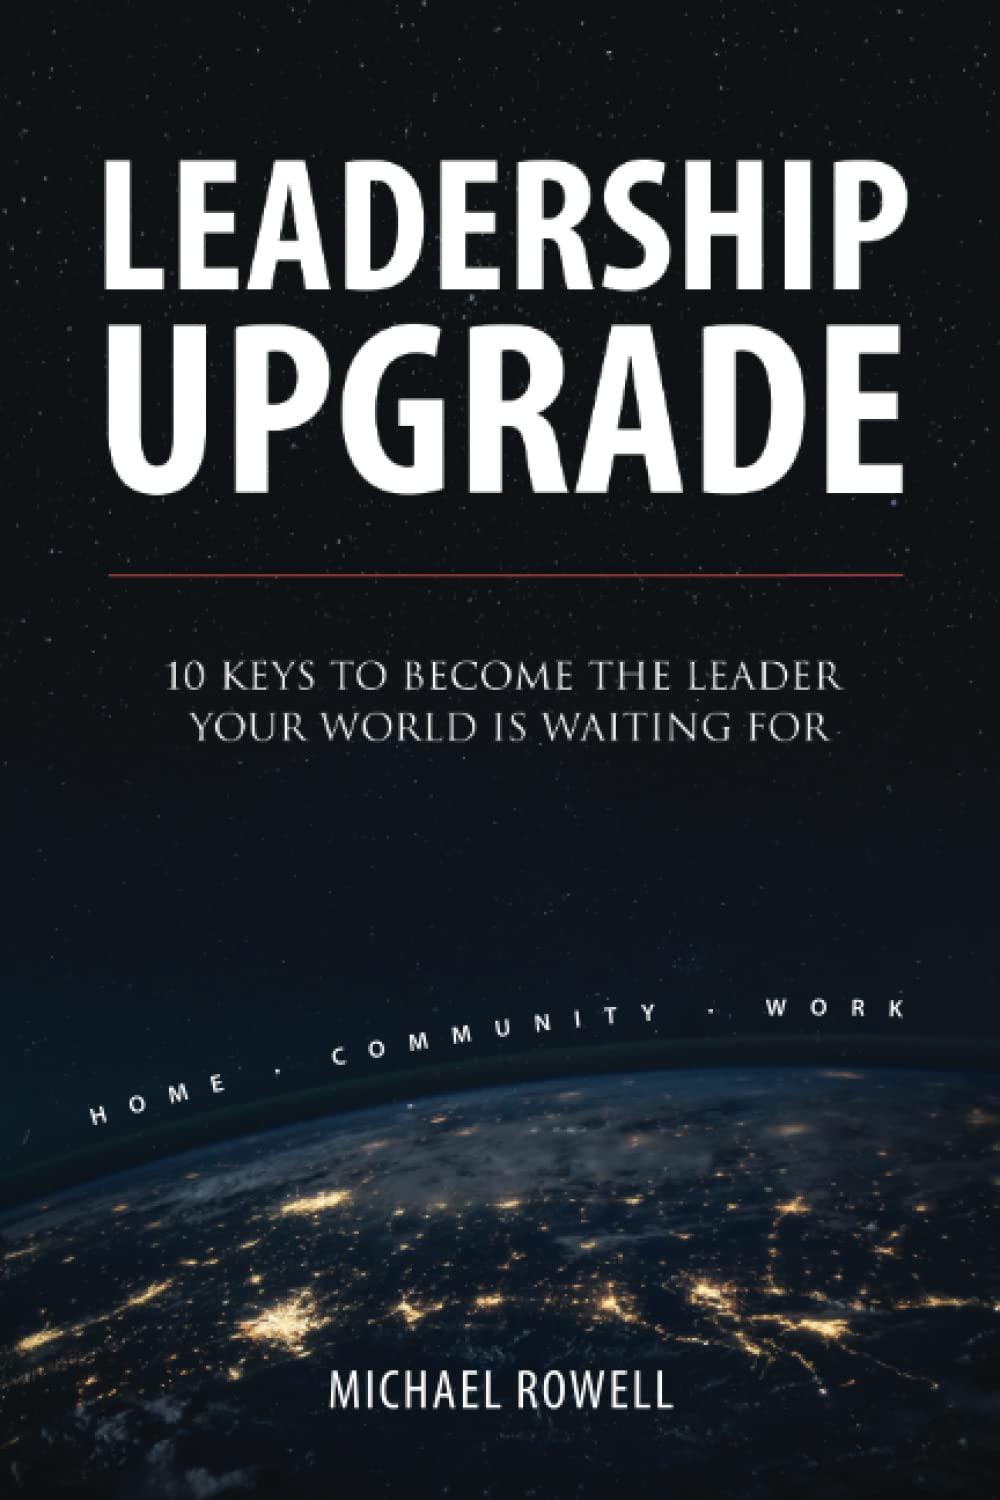 leadership upgrade 10 keys to become the leader your world is waiting for home community work 1st edition